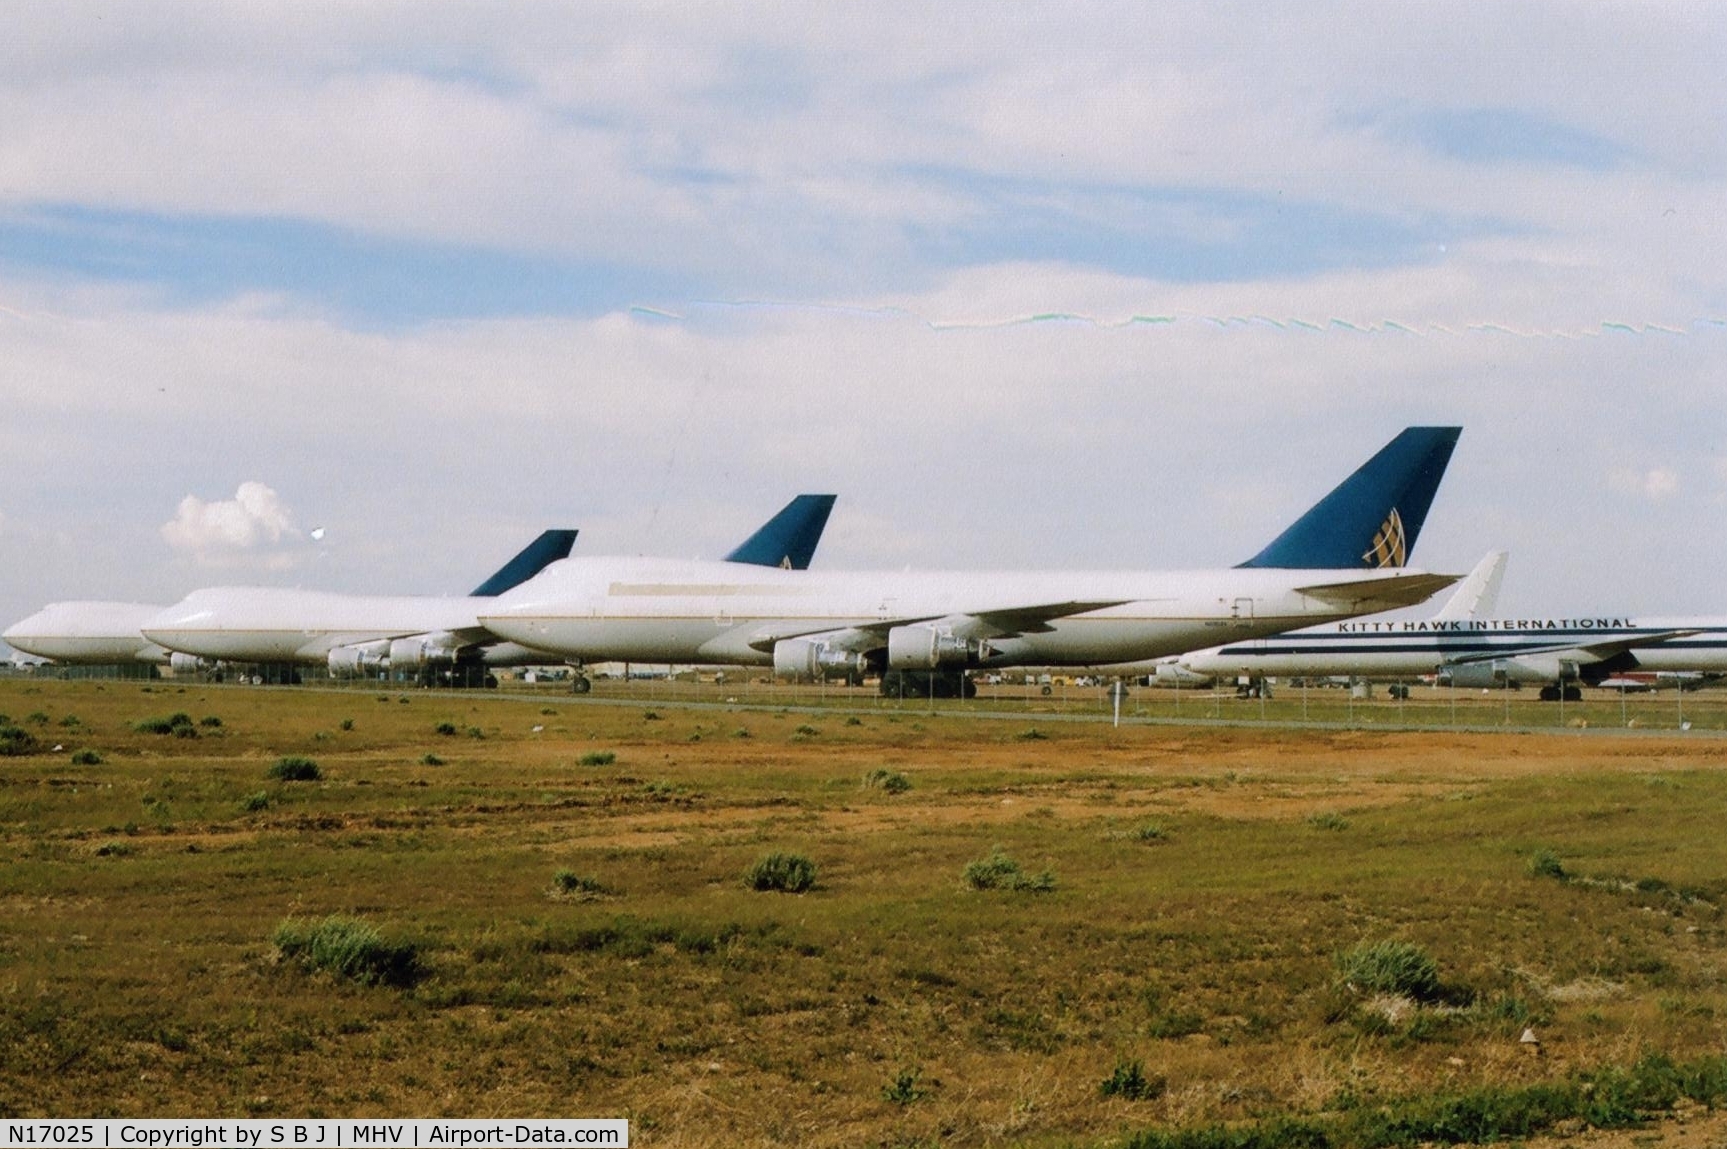 N17025, 1973 Boeing 747-238B C/N 20535, Boeing N17025 at the Mojave storage.Wonder if any of these fine old birds will ever fly again? Still vividly remember how impressed I was in the 70s as they flew that long final into SFO. Marvelled at their gigantic size.